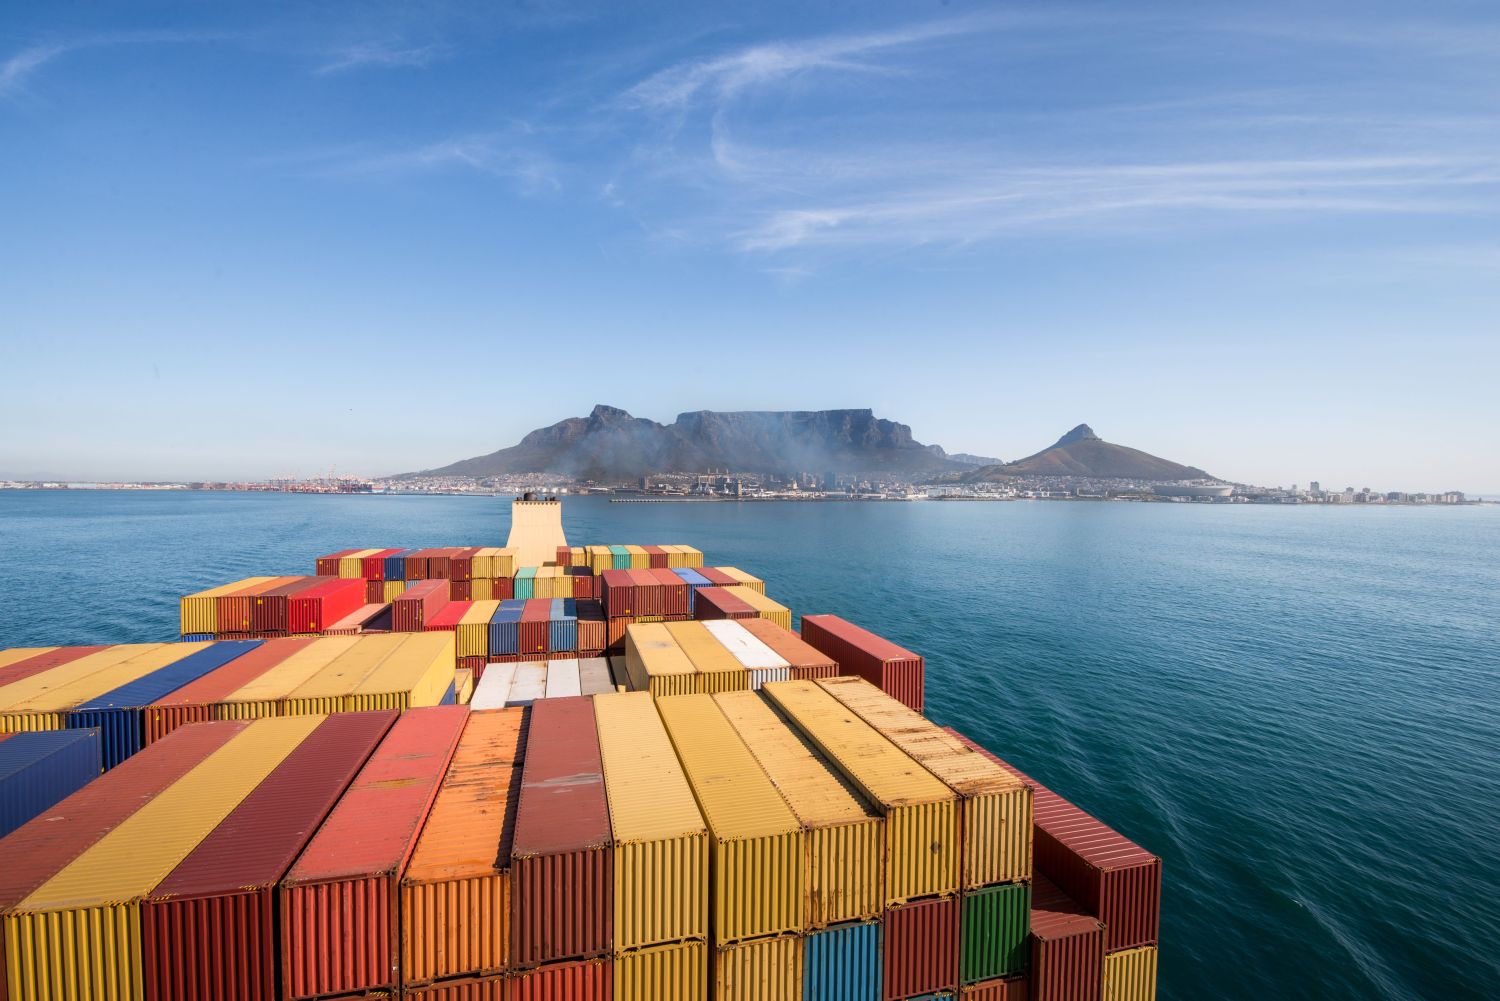 Large stacked container ship leaving the port of Cape Town with Table mountain and the city in the background, South Africa.